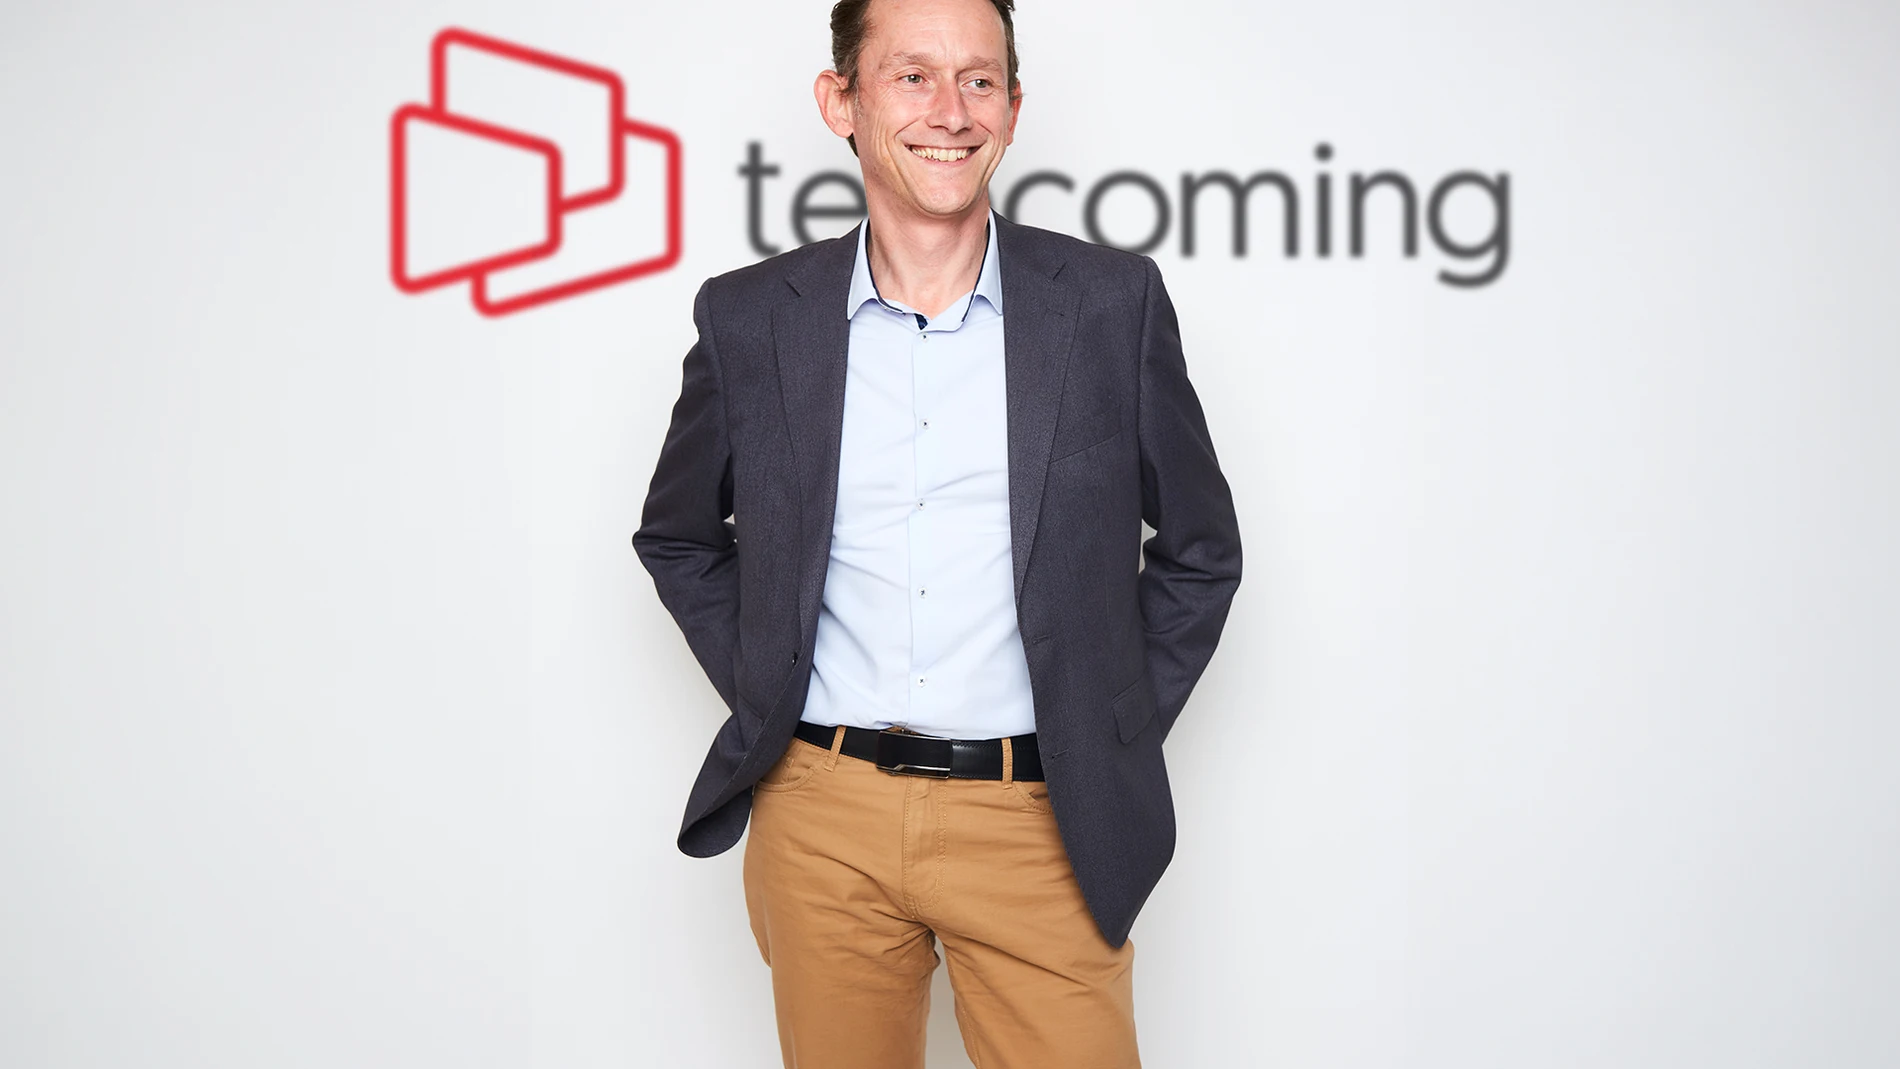 Cyrille Thivat, Ceo de Telecoming